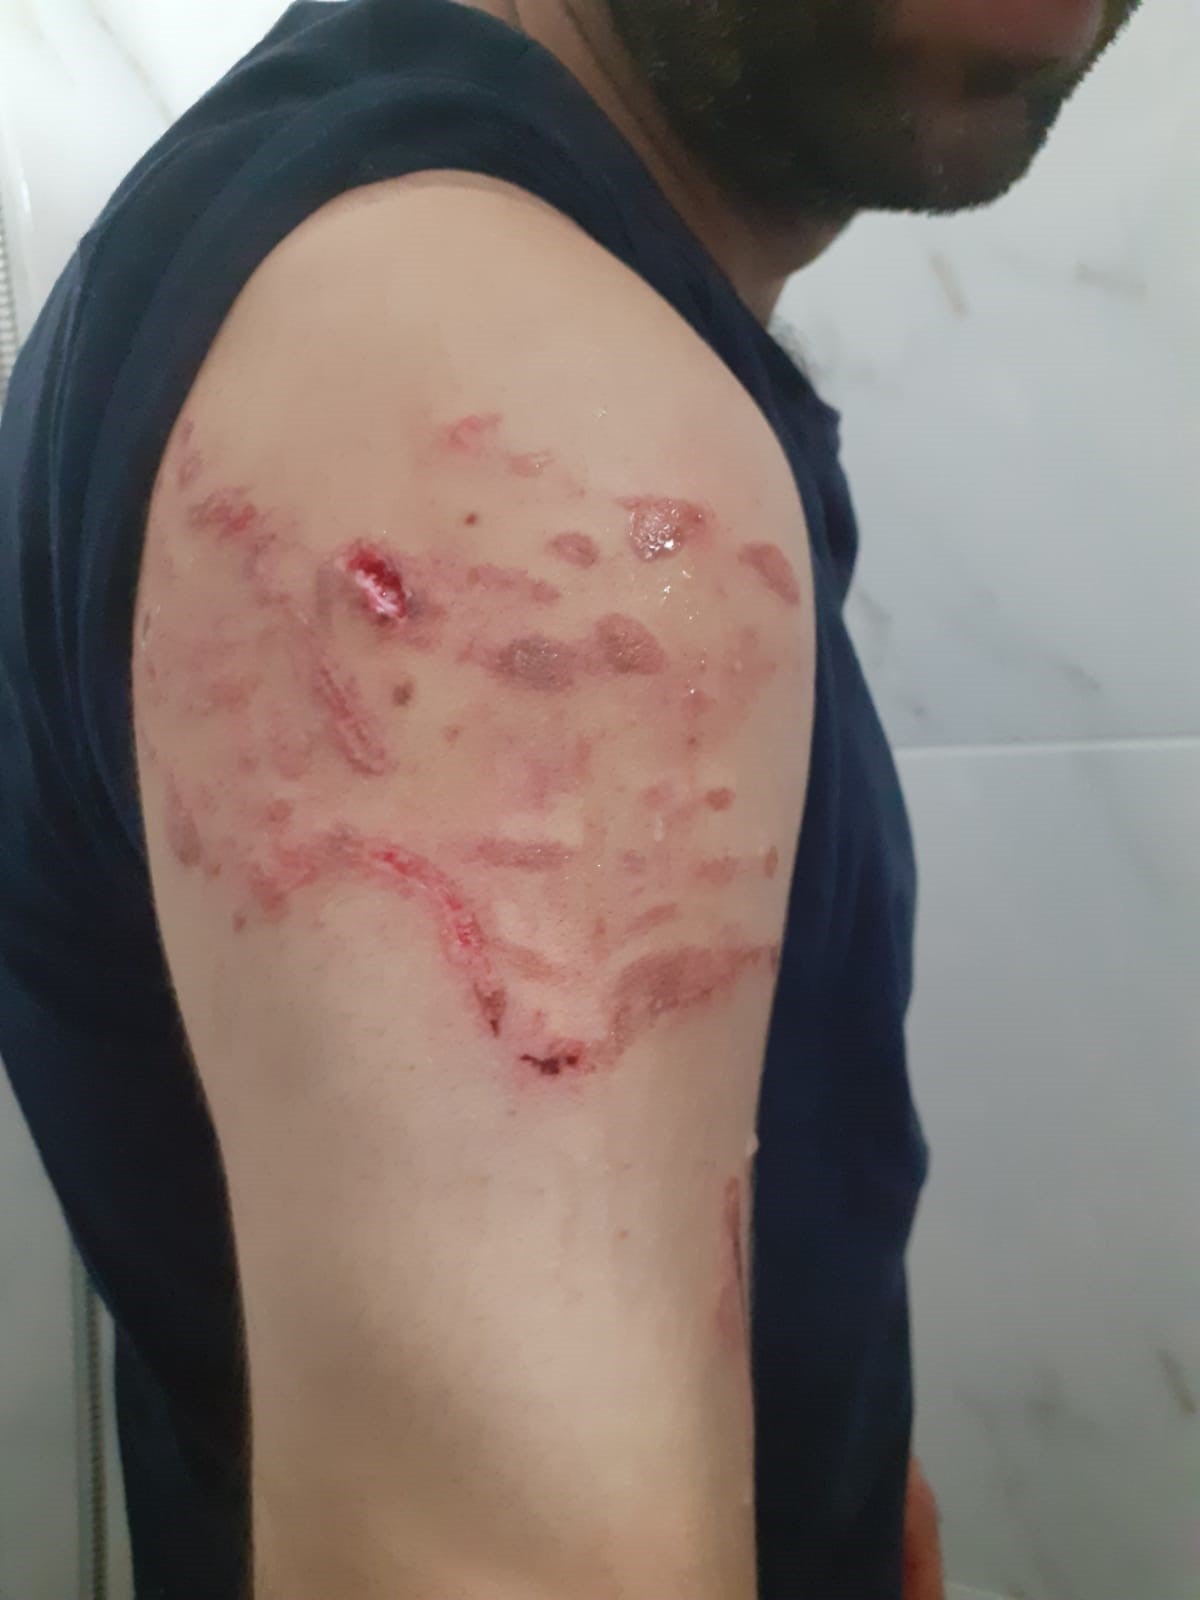 Seyhmus Yilmaz says he was bitten and scratched by police dogs and that police officers beat him.© 2020 Private